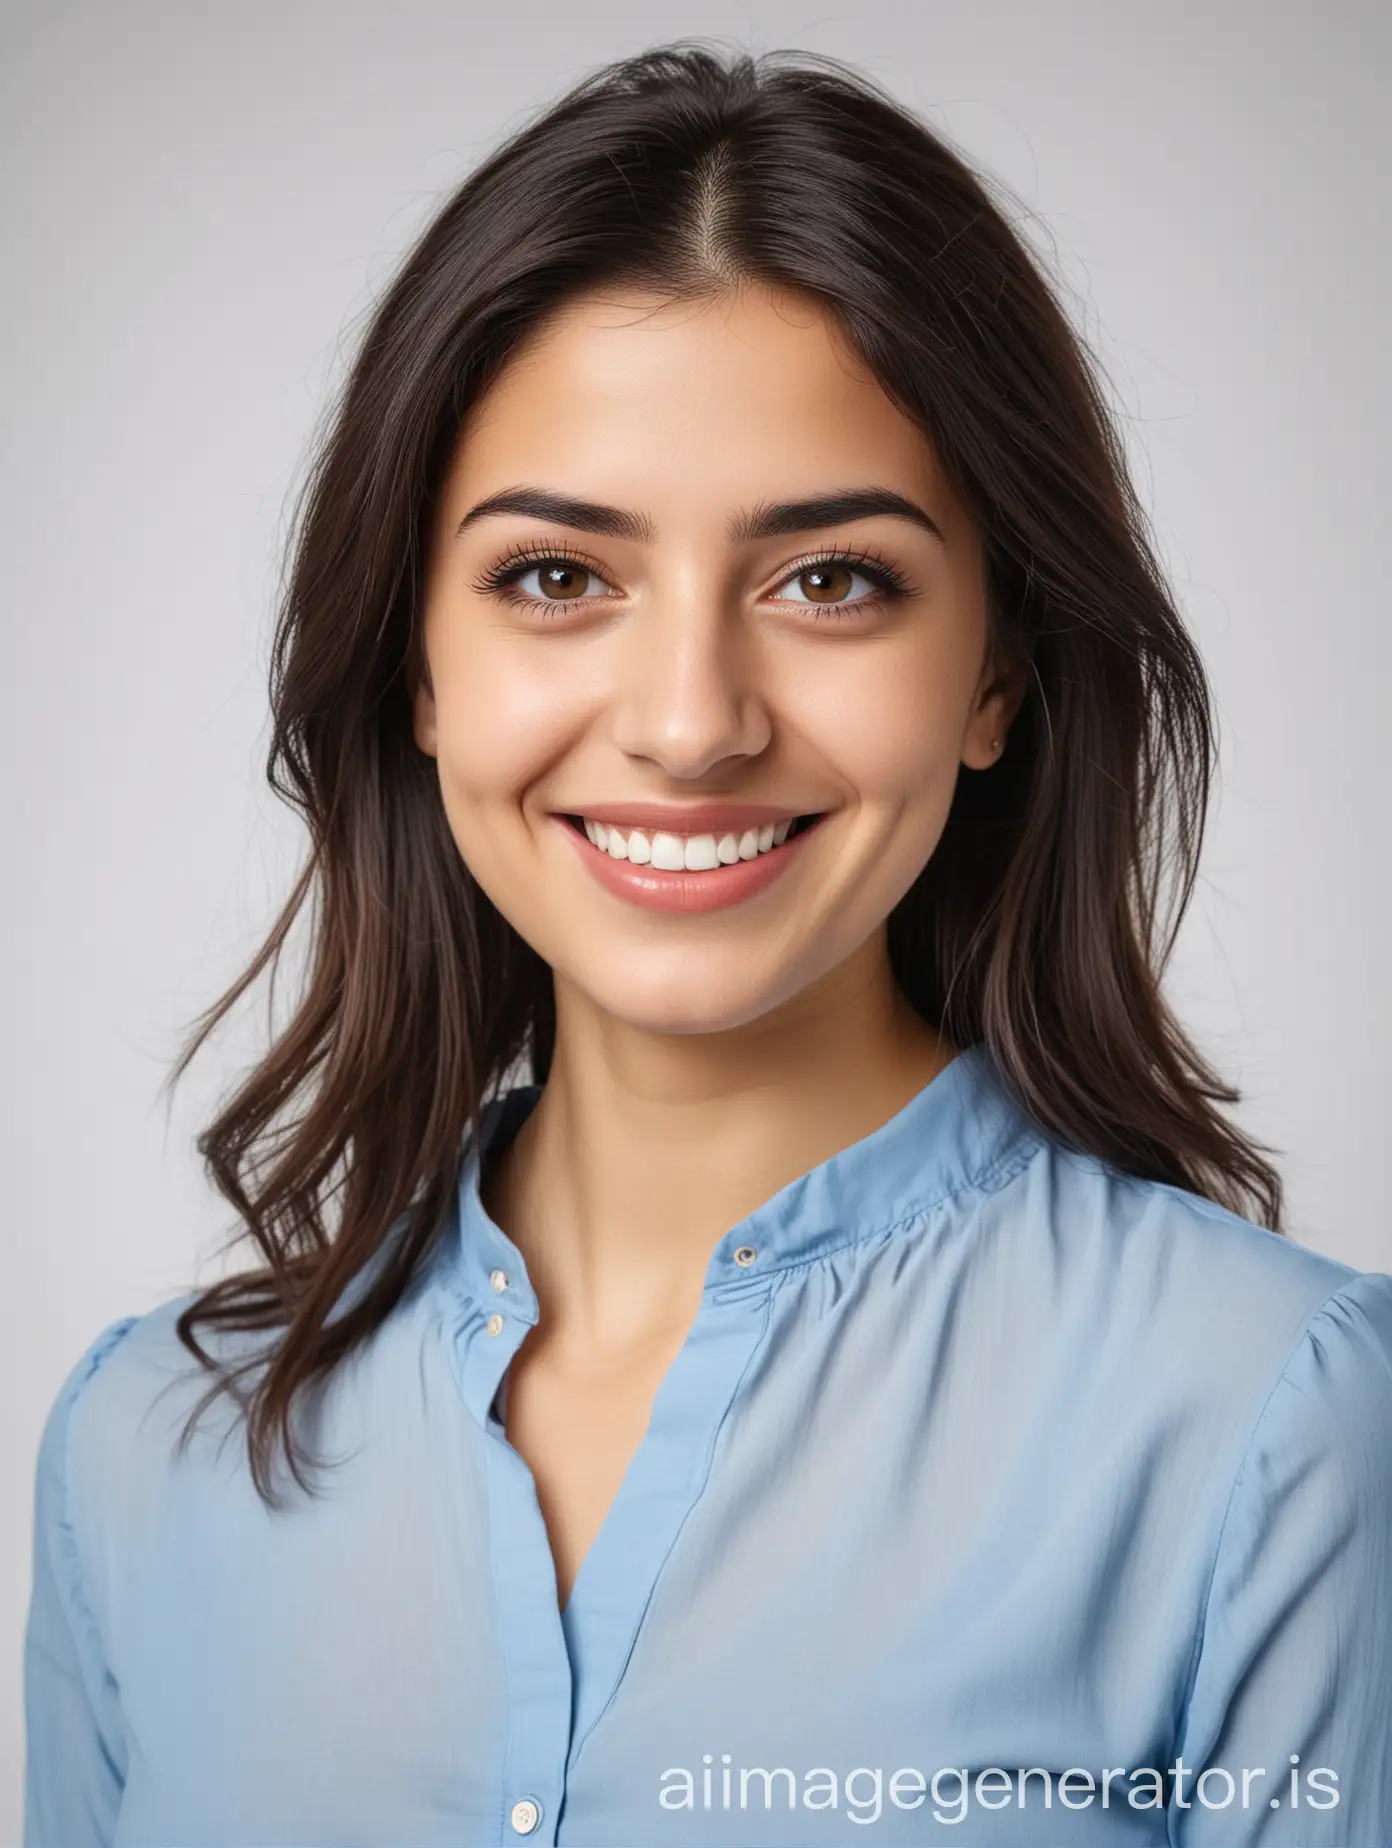 Smiling-Armenian-Woman-in-Blue-Blouse-on-White-Background